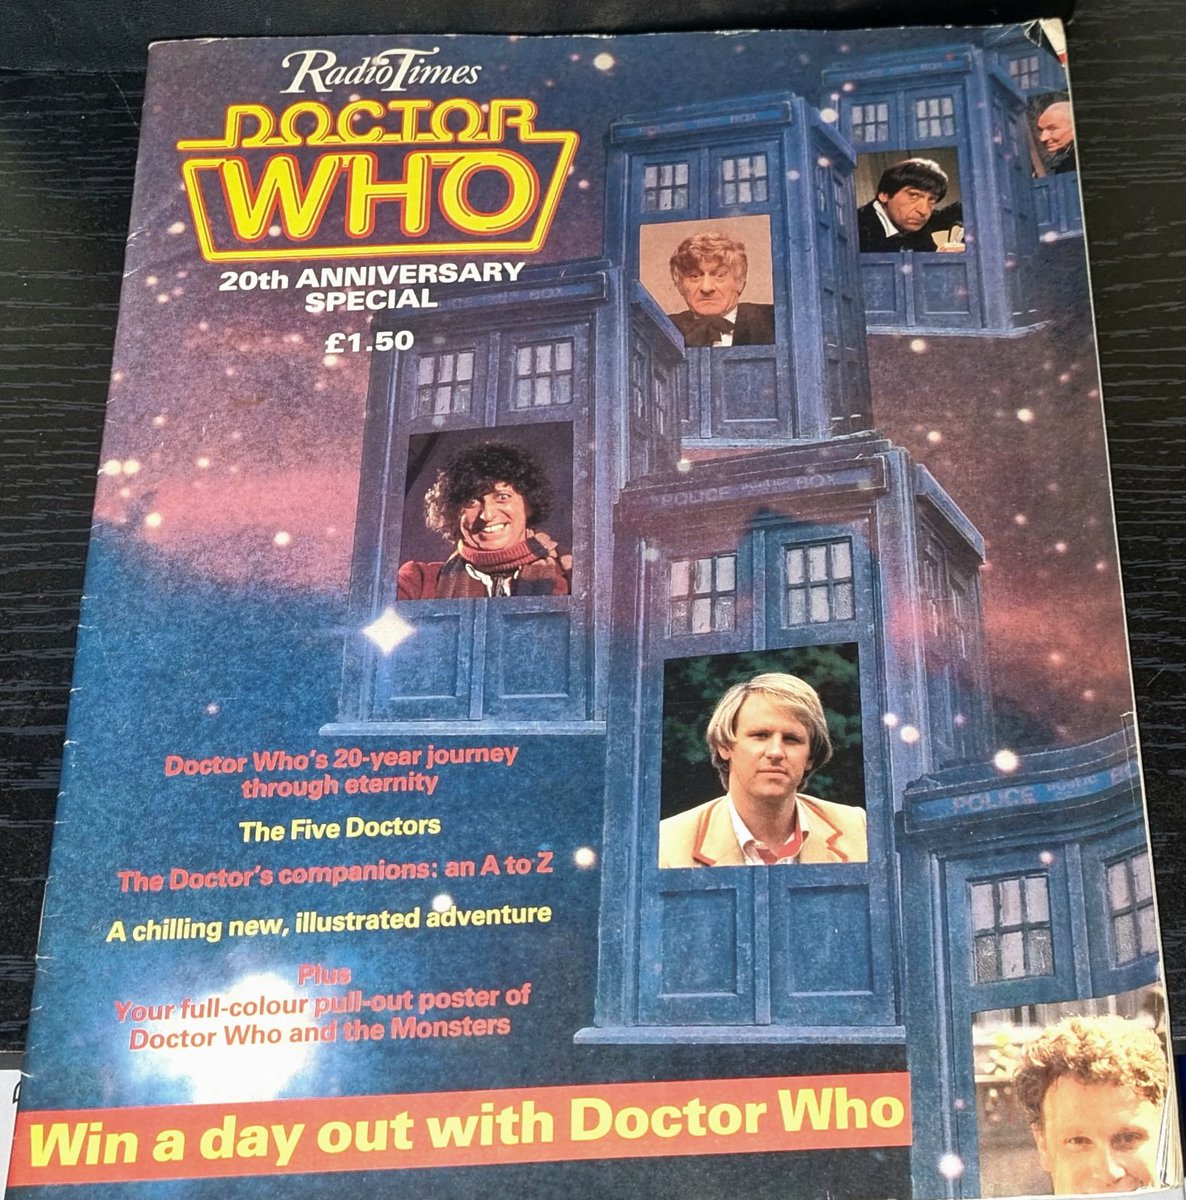 With the announcement of season 20 blu ray set, dug out these beauties from 1983. The Radio Times is wrapped in cling film as I couldn't find a big enough bag to protect it. #DoctorWho #TheFiveDoctors